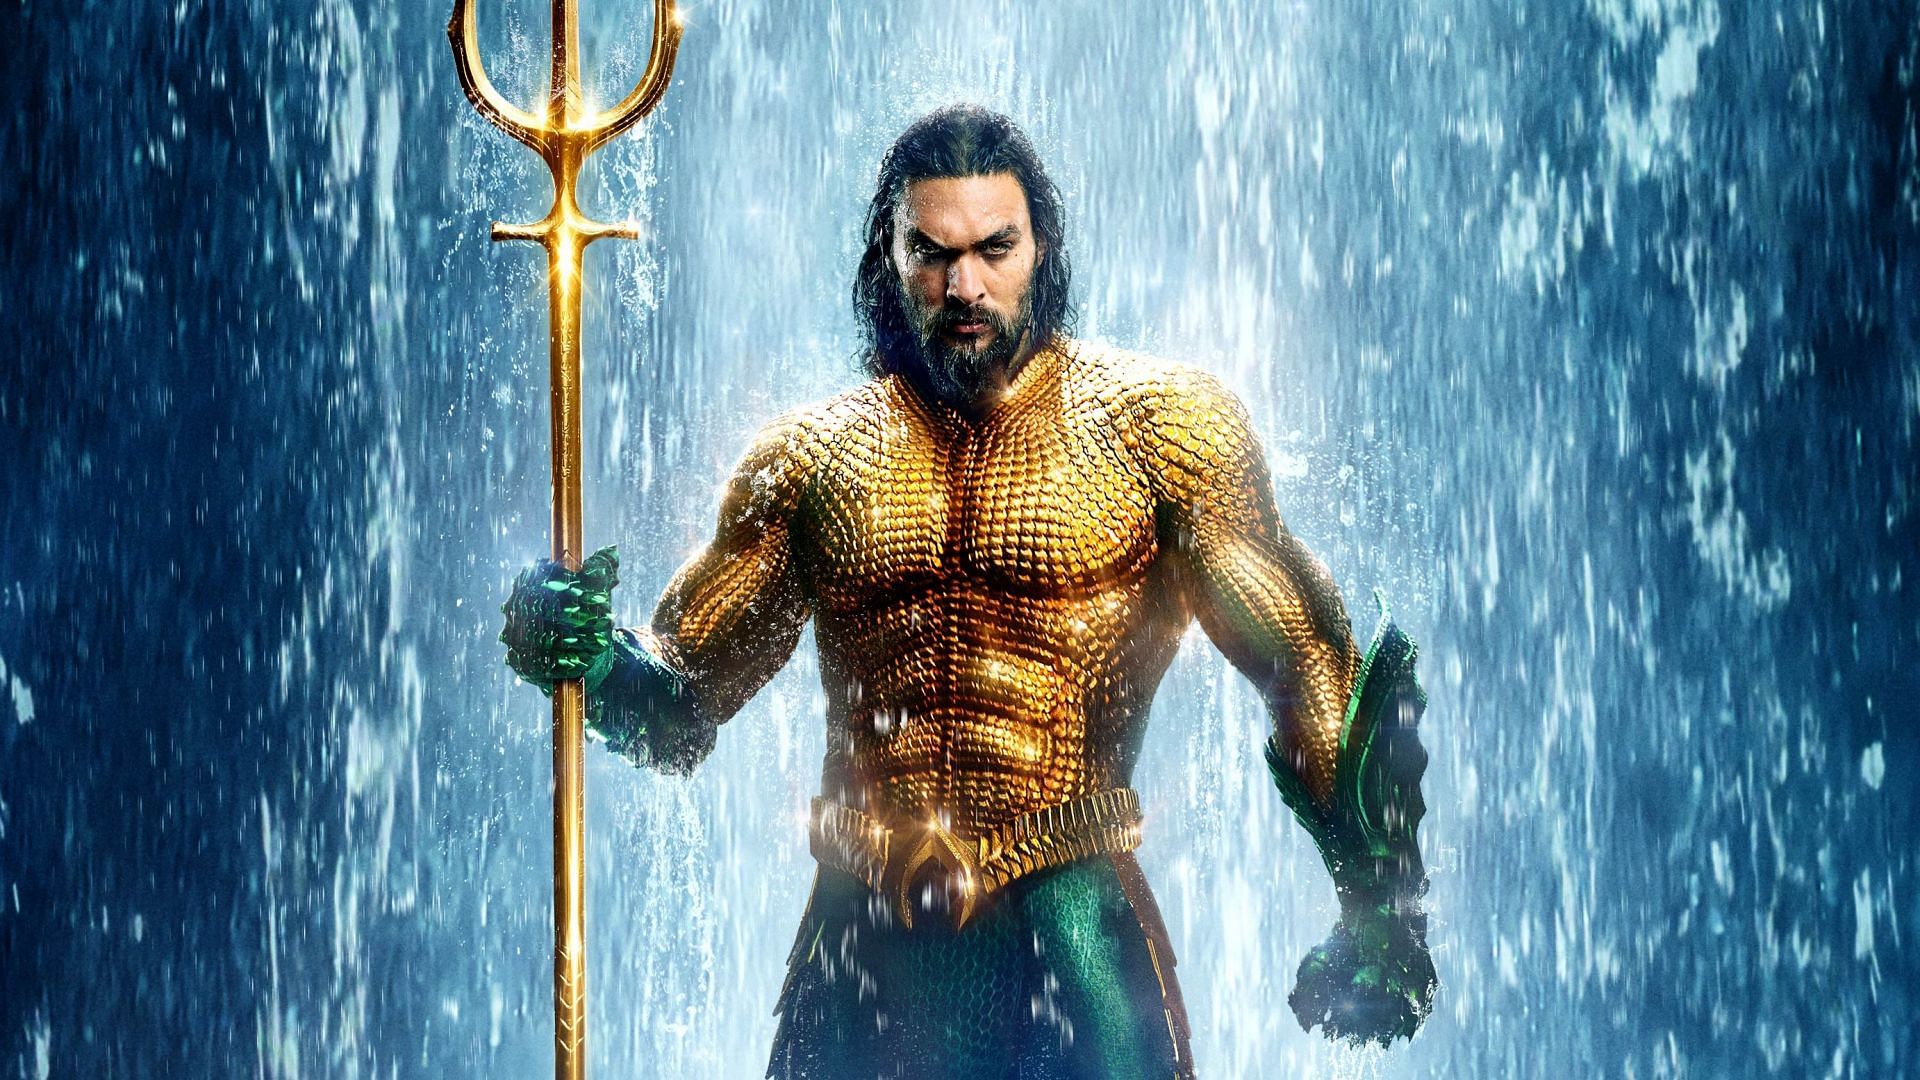 The upcoming Aquaman movie is expected to have a significant impact on DC